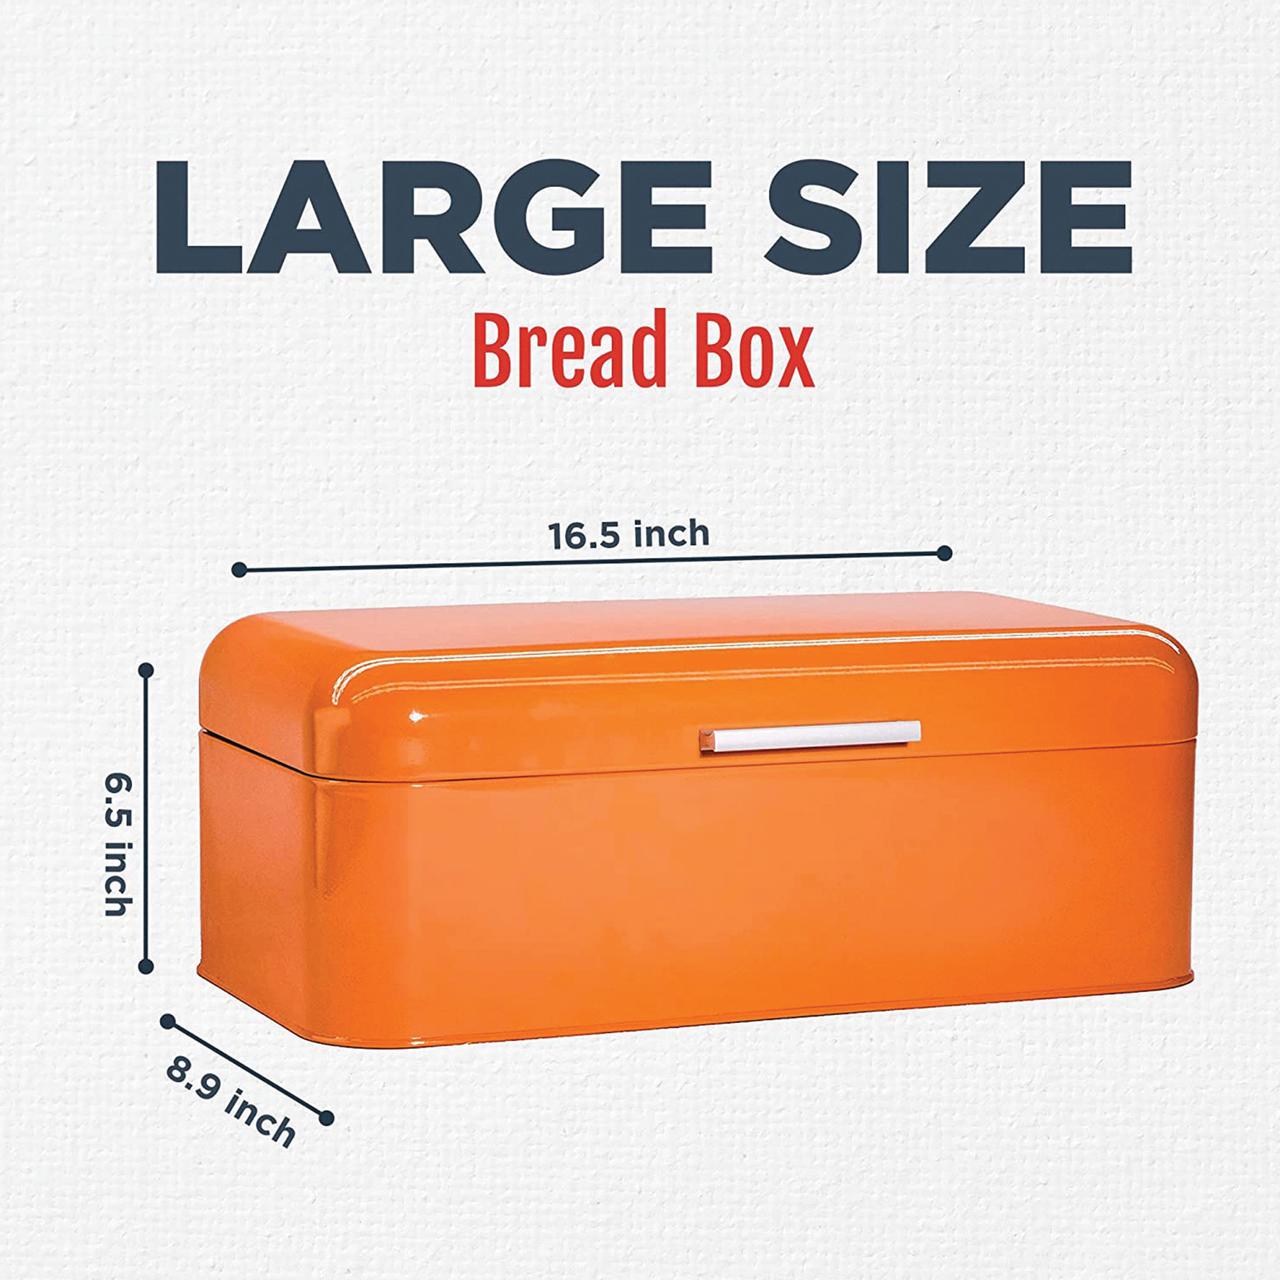 Culinary Couture Stainless Steel Bread Box for Kitchen Countertop Metal Storage Container Orange - image 2 of 8